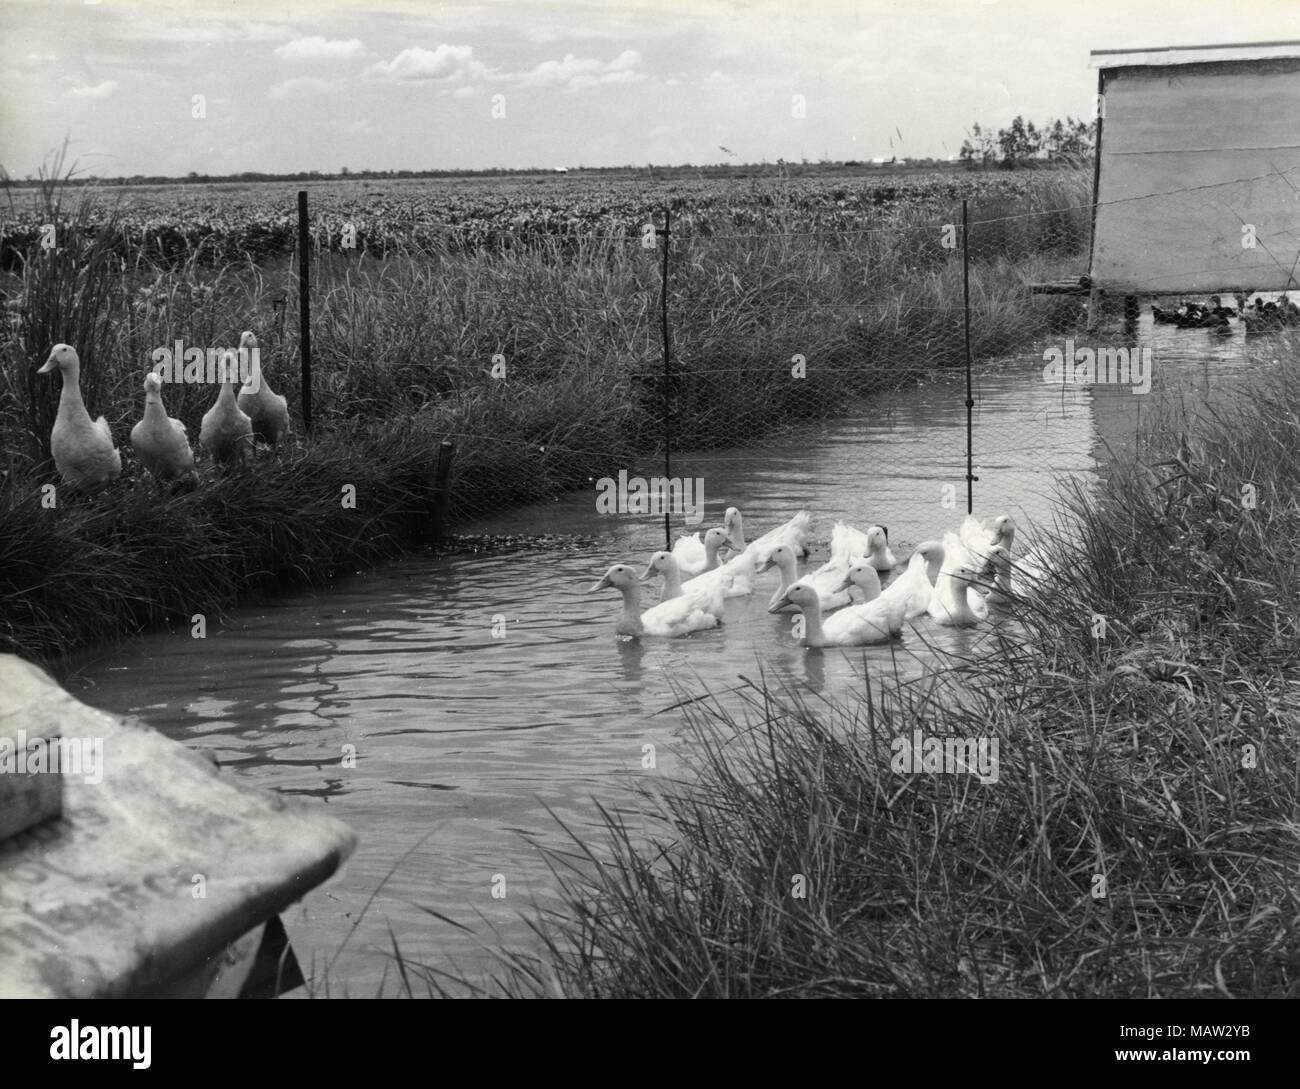 Ducks in the canal, Zambia, South Rhodesia Stock Photo